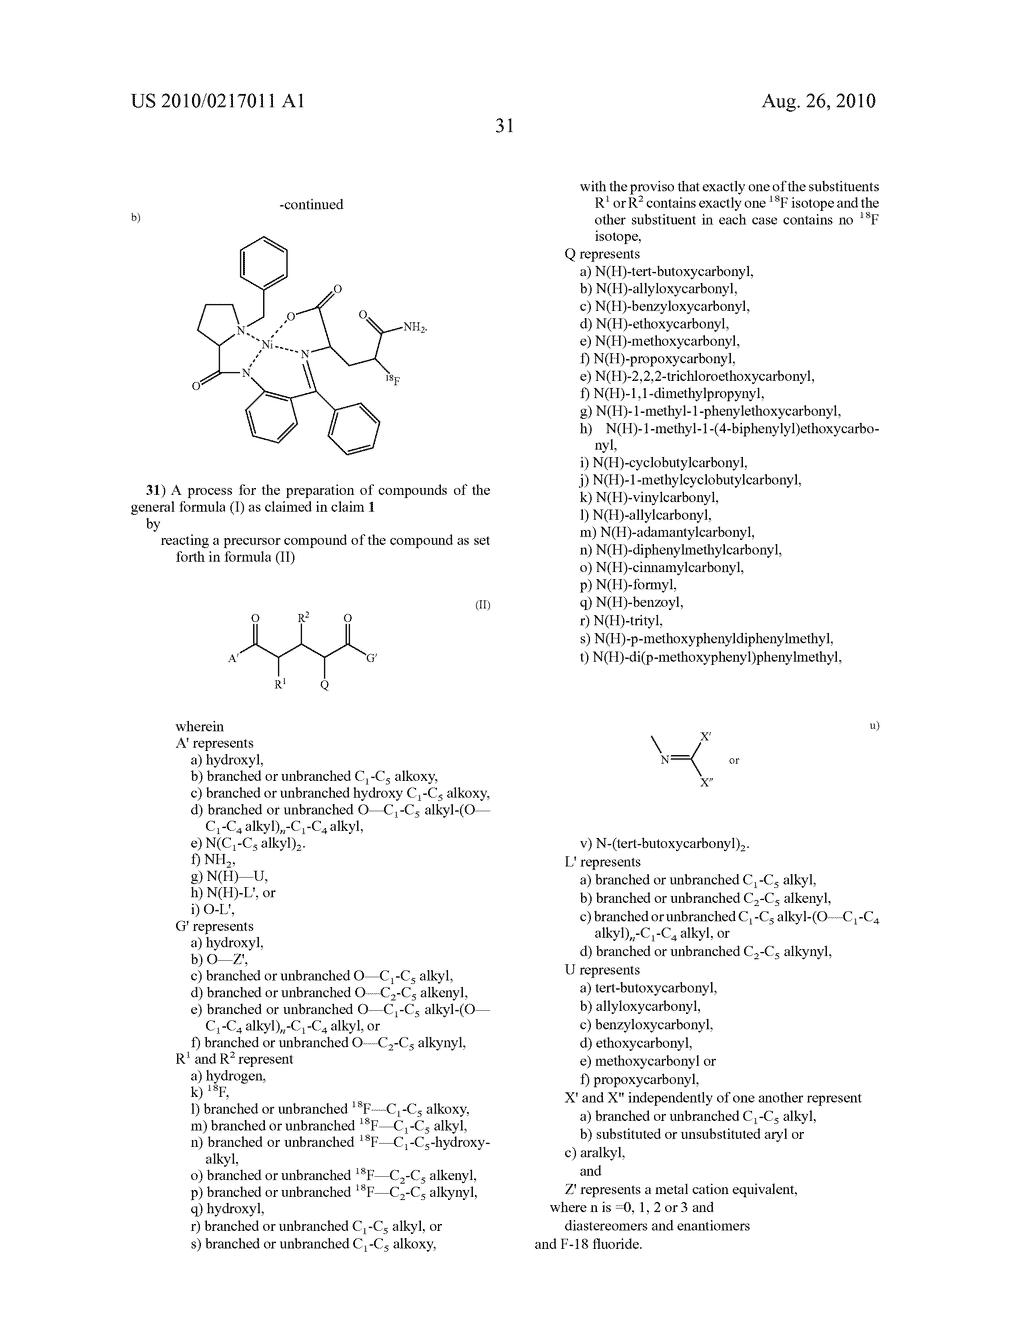 [F-18]-LABELED L-GLUTAMIC ACID, [F-18]-LABELED L-GLUTAMINE, DERIVATIVES THEREOF AND USE THEREOF AND PROCESSES FOR THEIR PREPARATION - diagram, schematic, and image 46